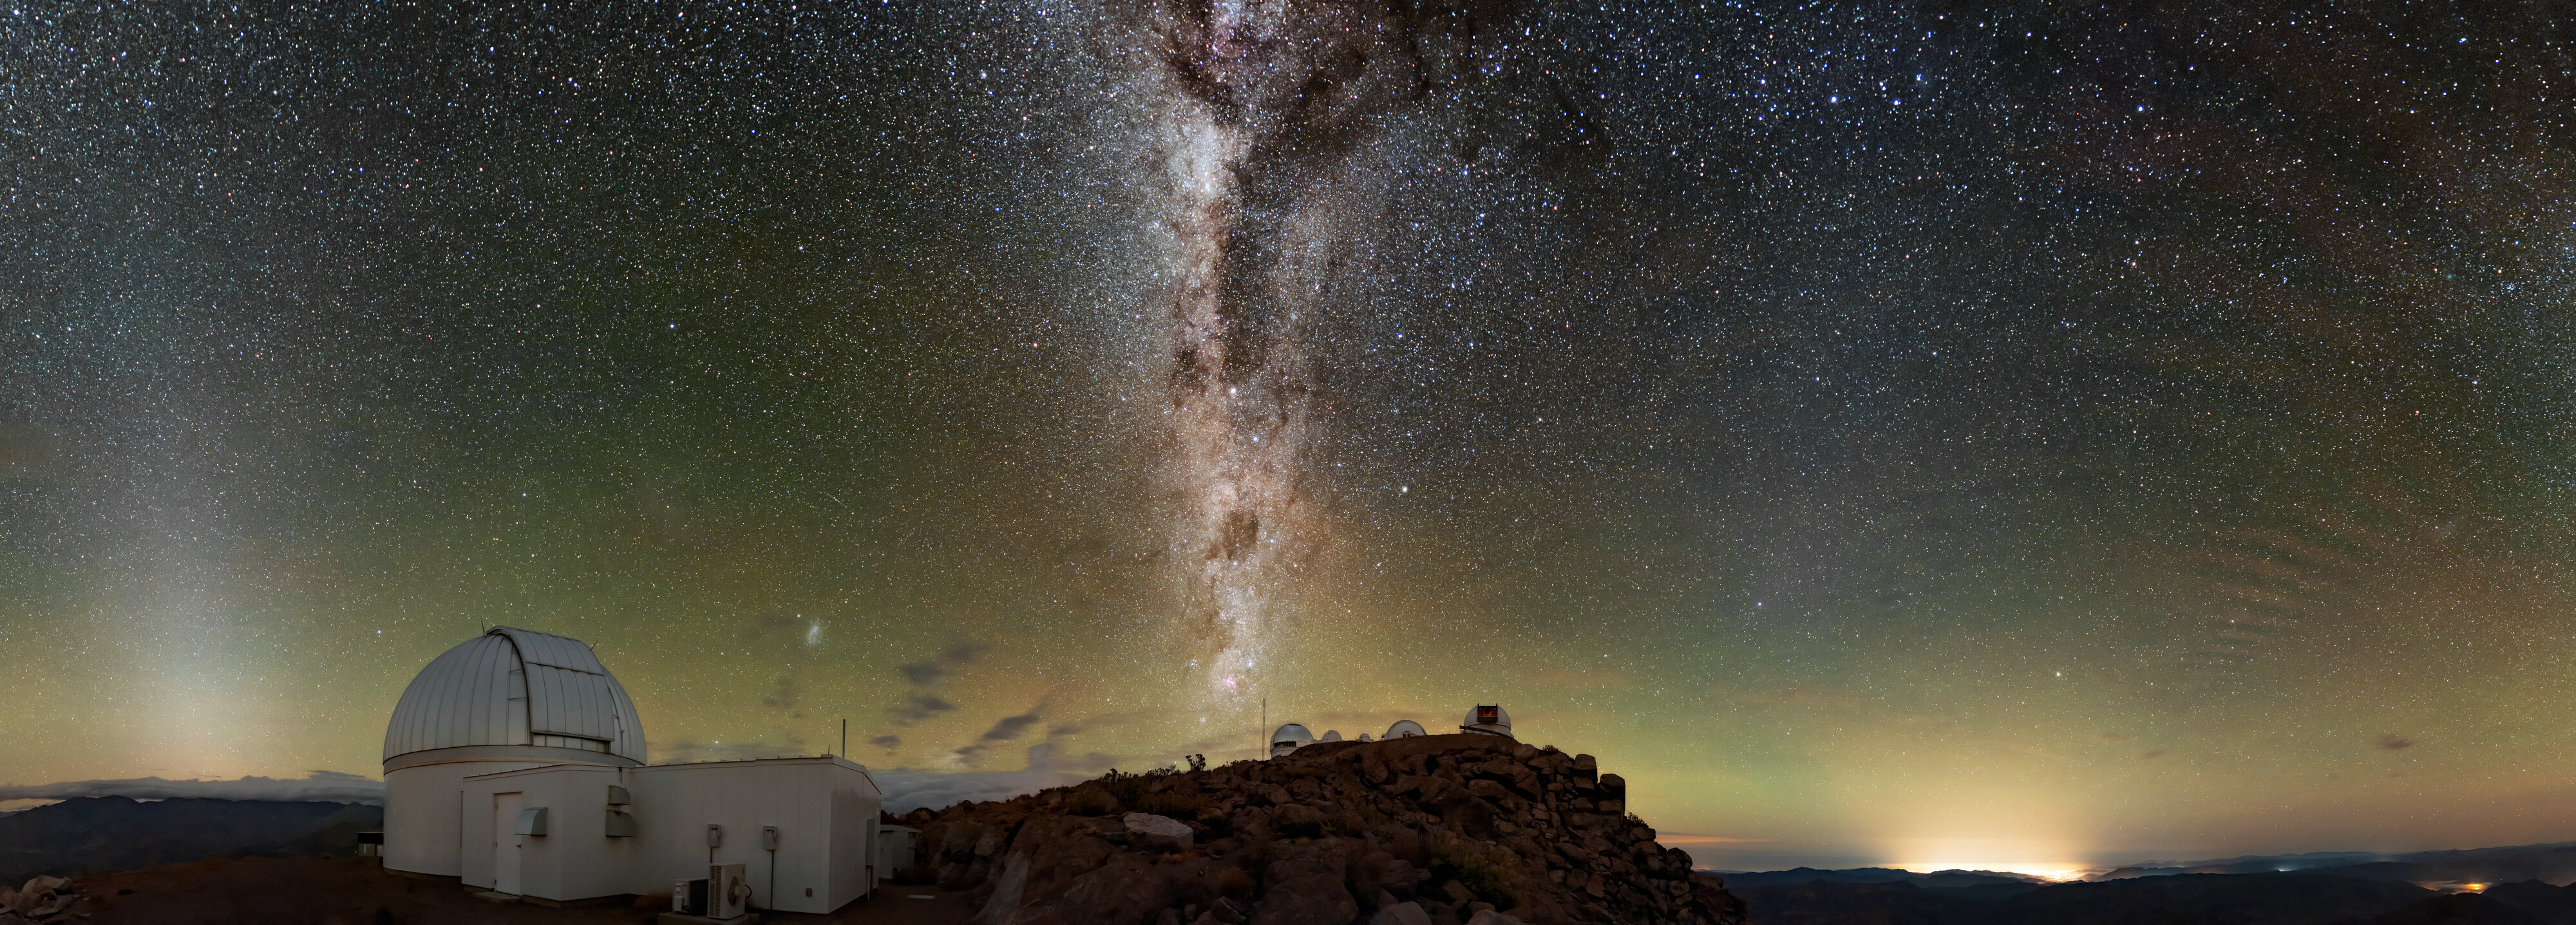 Protecting the night sky against light pollution is an important activity for observatories in Chile. In this image taken from CTIO, light from the nearest major town, La Serena, is visible on the horizon.